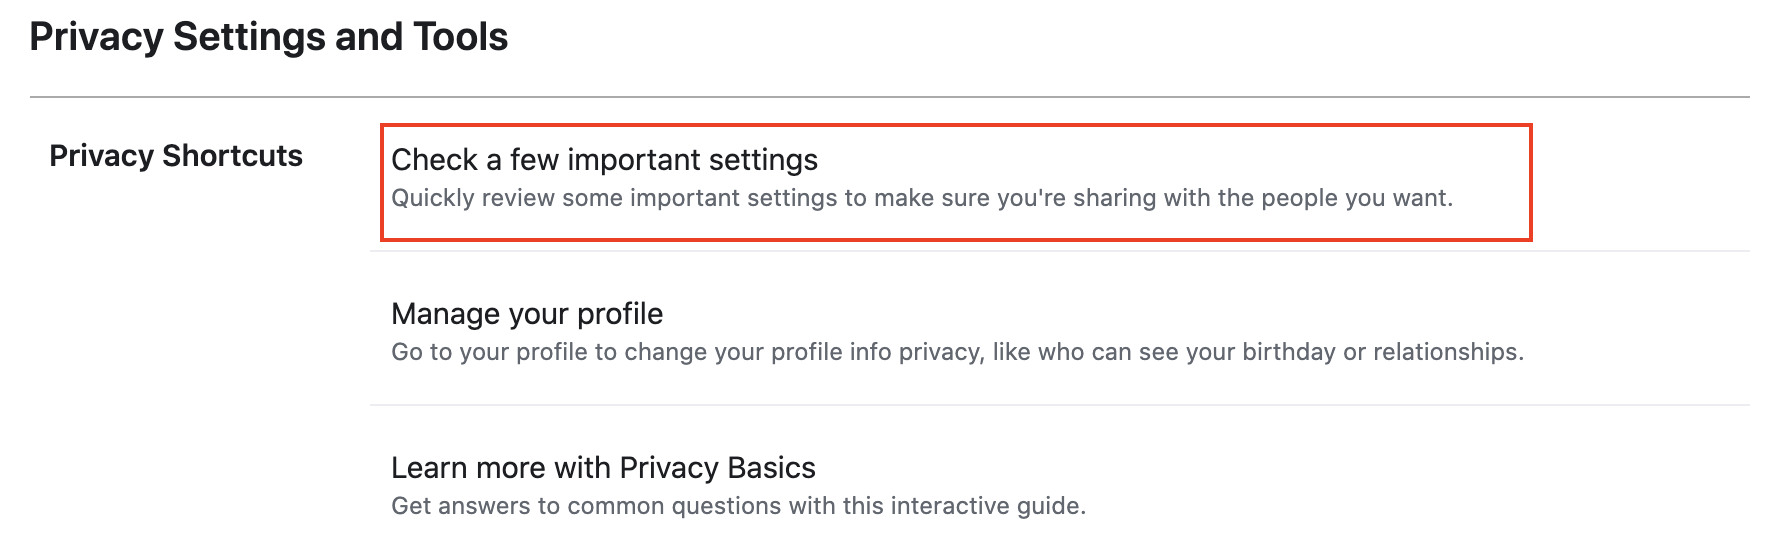 Facebook offers a helpful privacy shortcut that will help you check a few important settings.